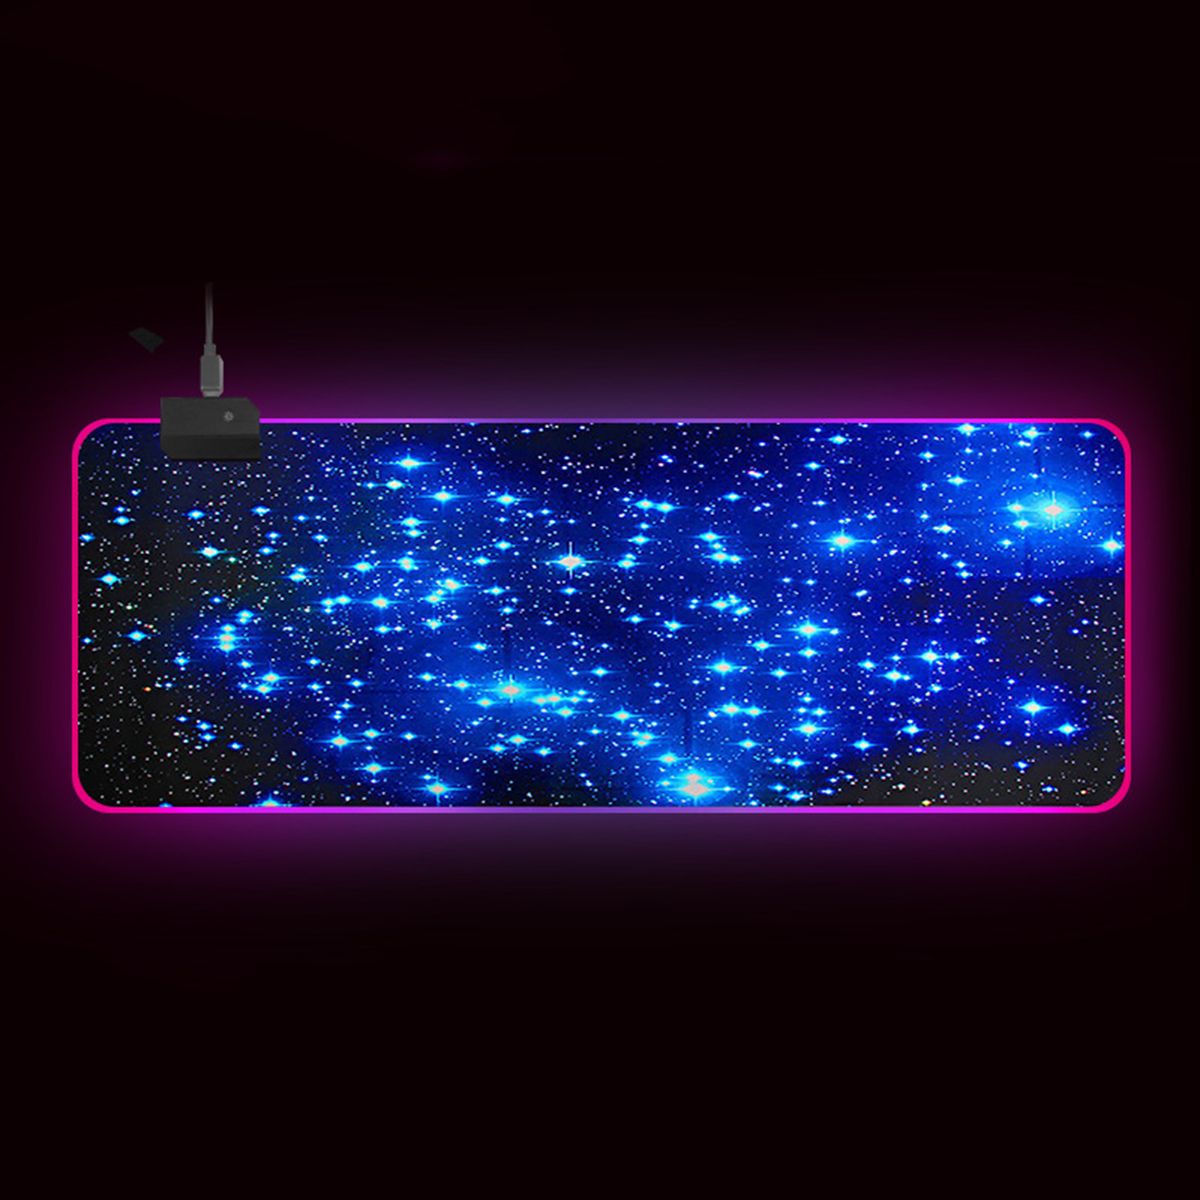 Galaxy-RGB-Mouse-Pad-Gaming-Keyboard-Pad-Non-slip-Rubber-Desktop-Table-Protective-Mat-for-Home-Offic-1757265